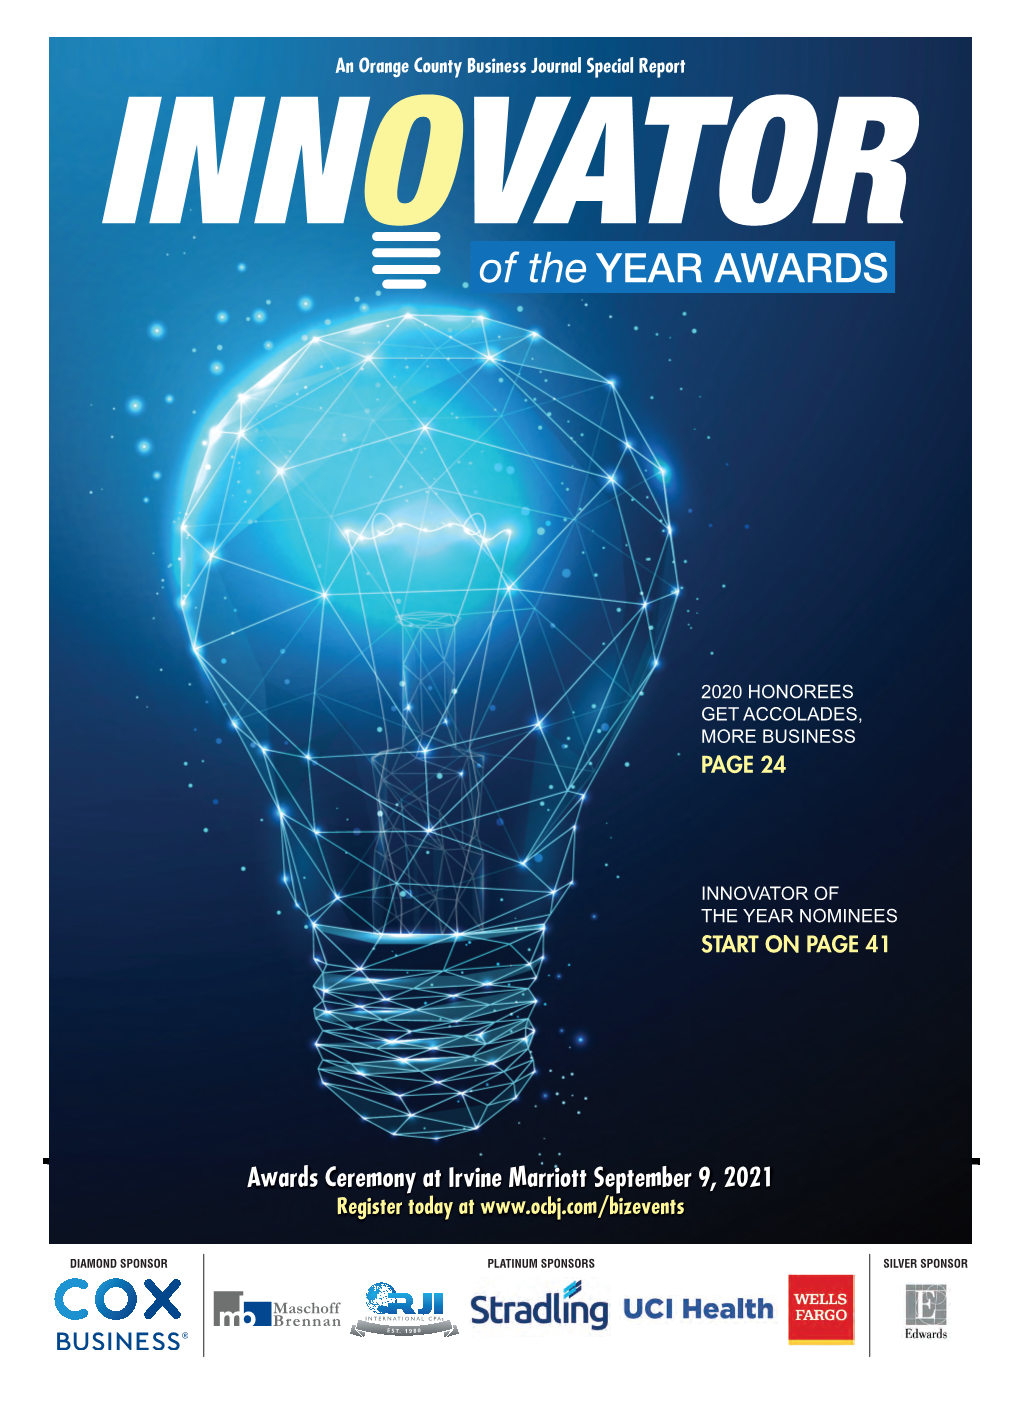 Innovator of the Year Awards August 9, 2021